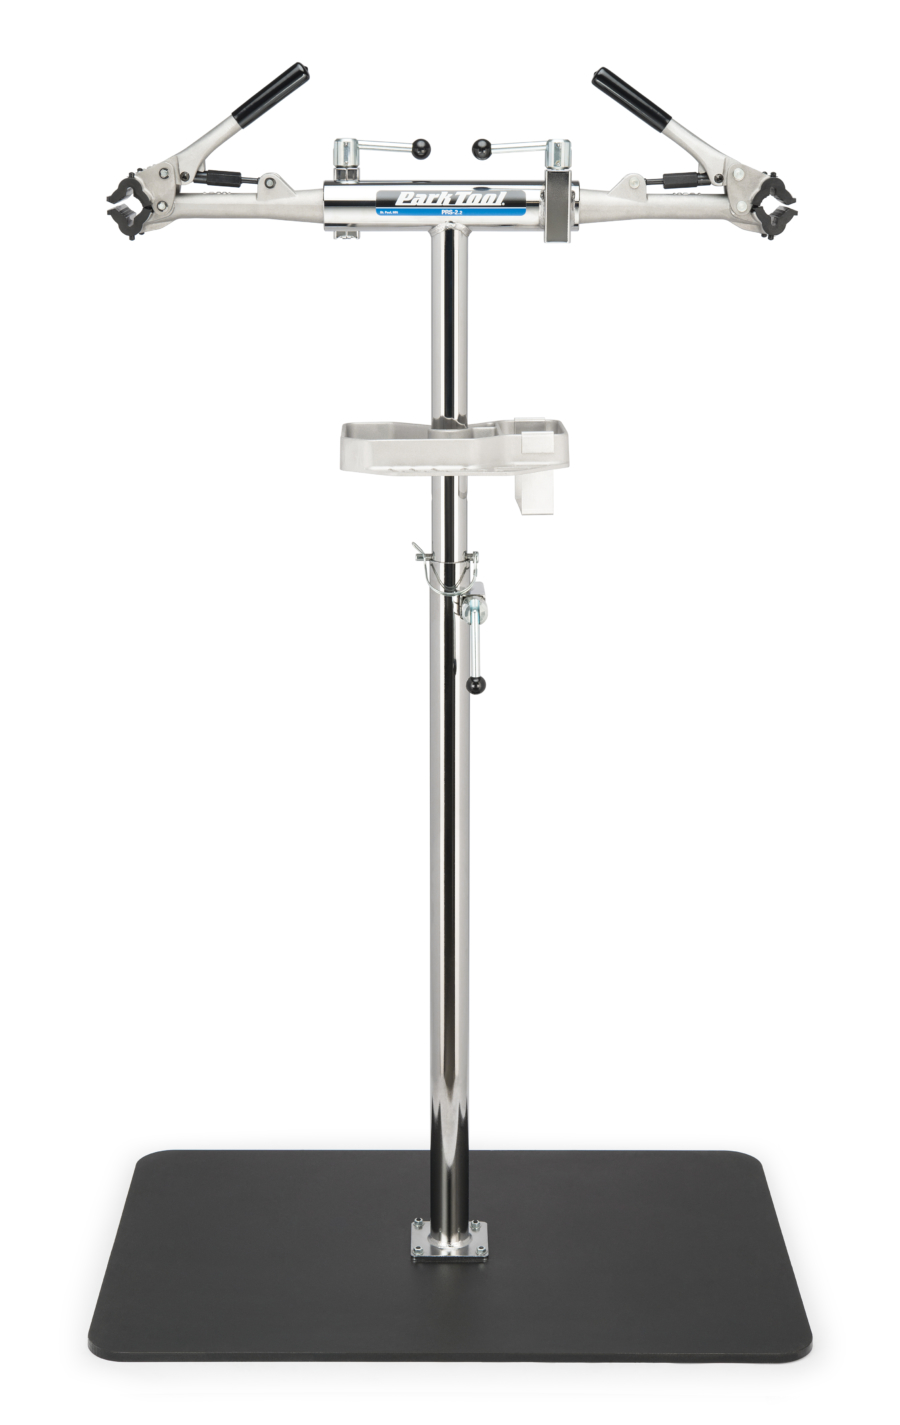 The Park Tool PRS-2.2-1 Deluxe Double Arm Repair Stand with base, enlarged